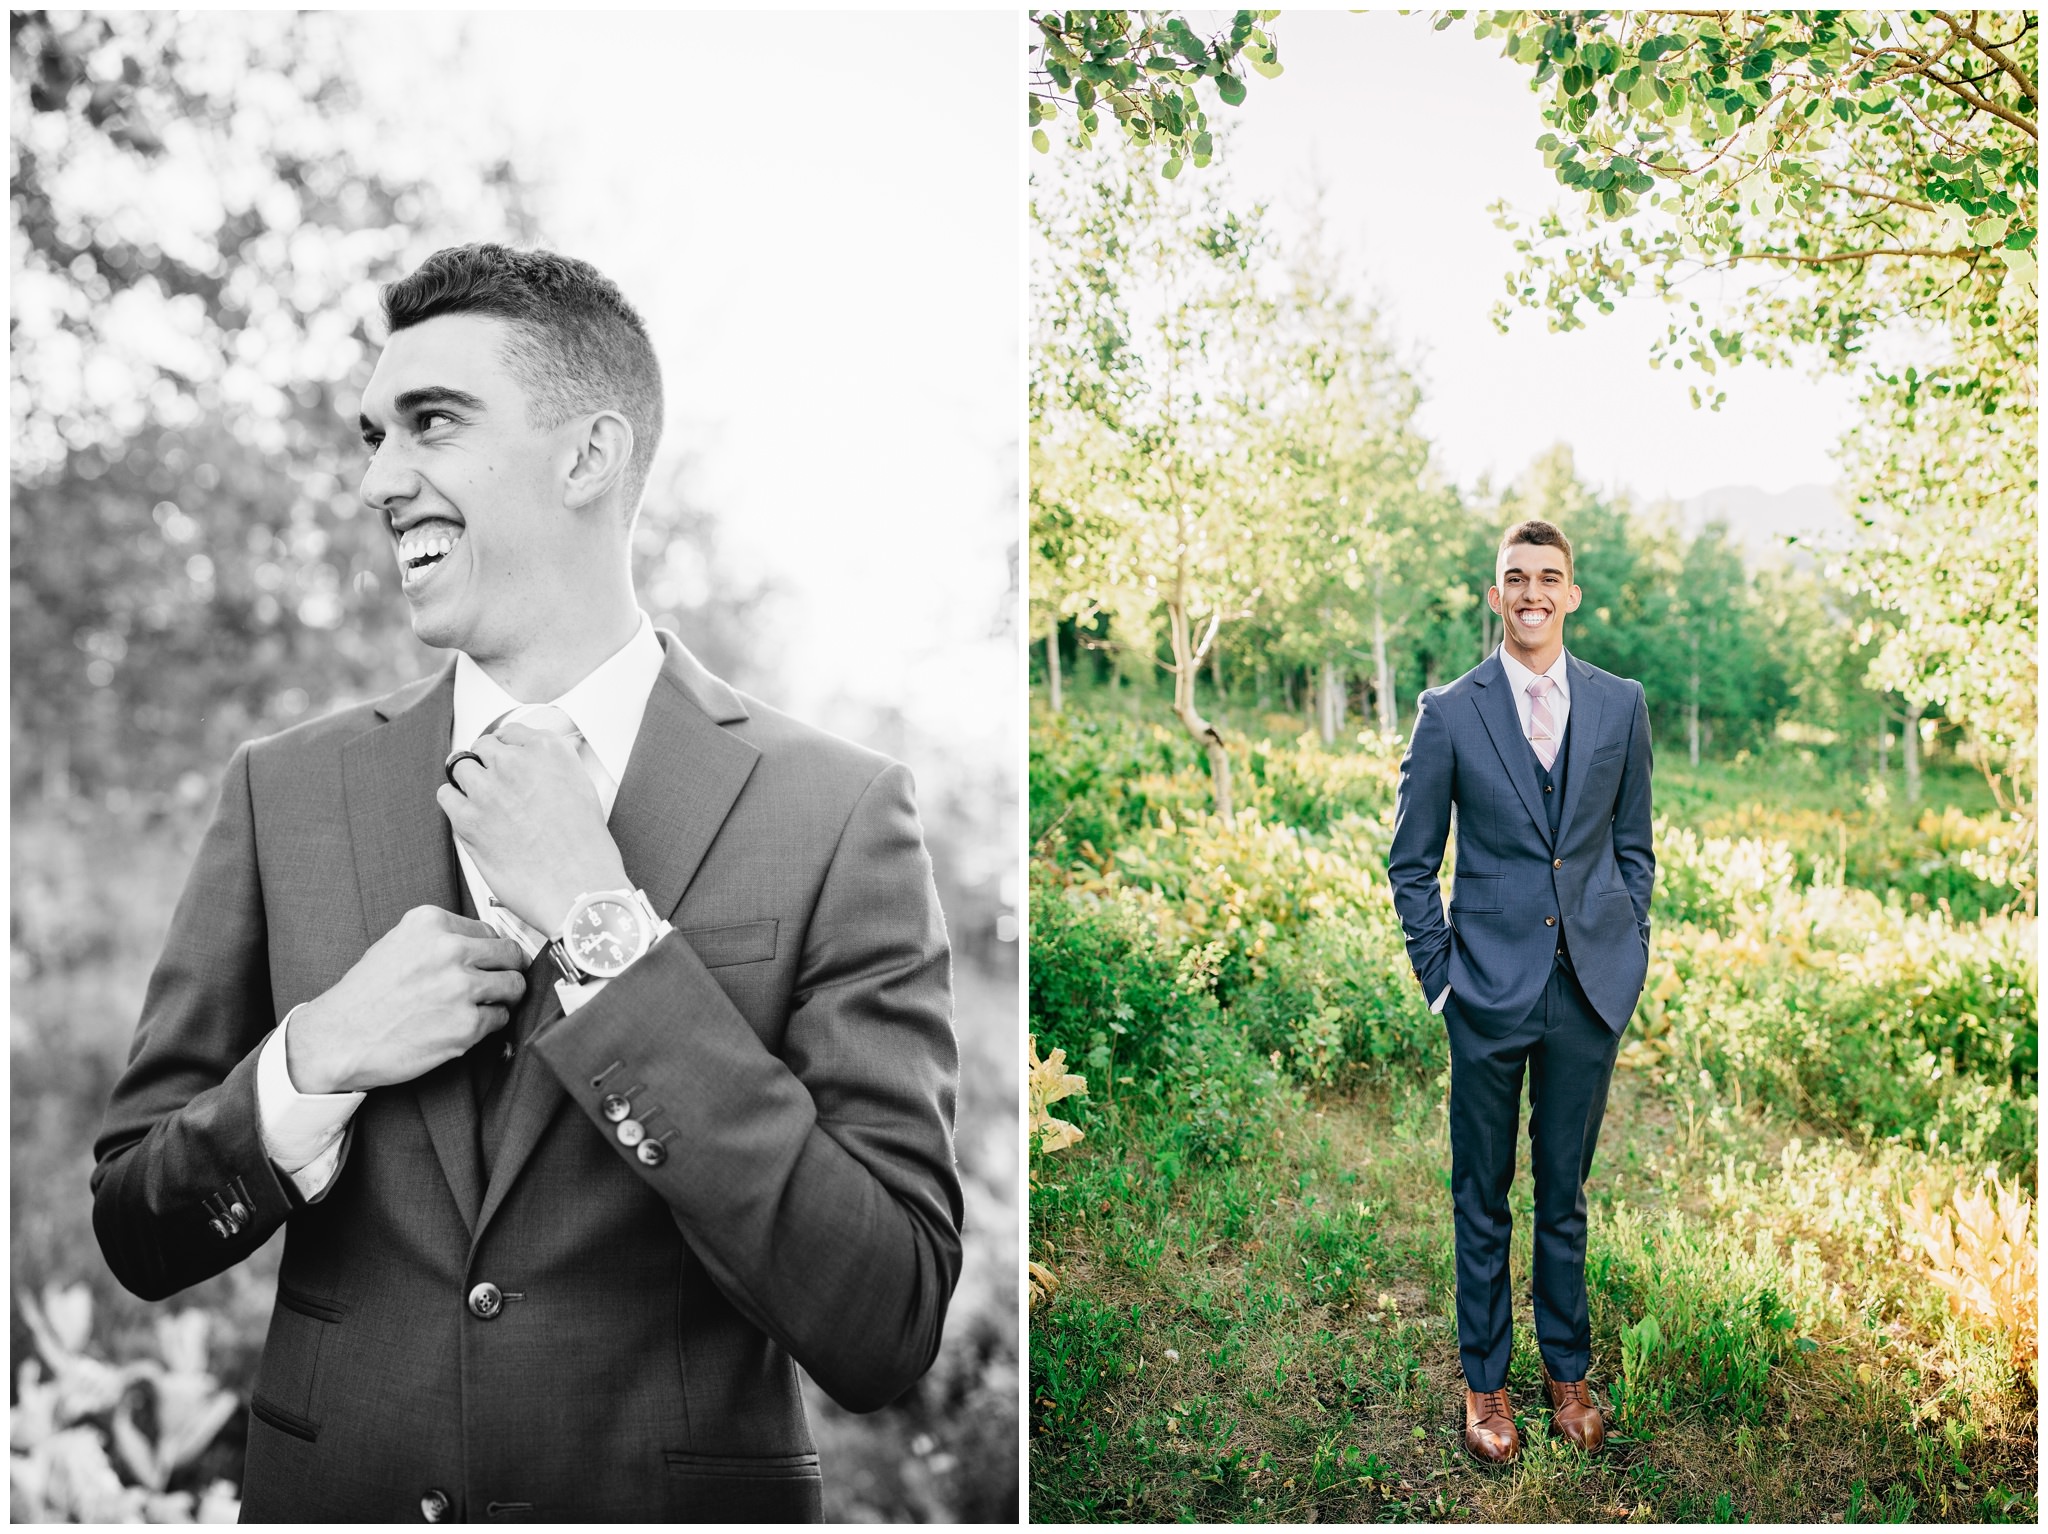 Groom portraits and pictures in the mountains near trees